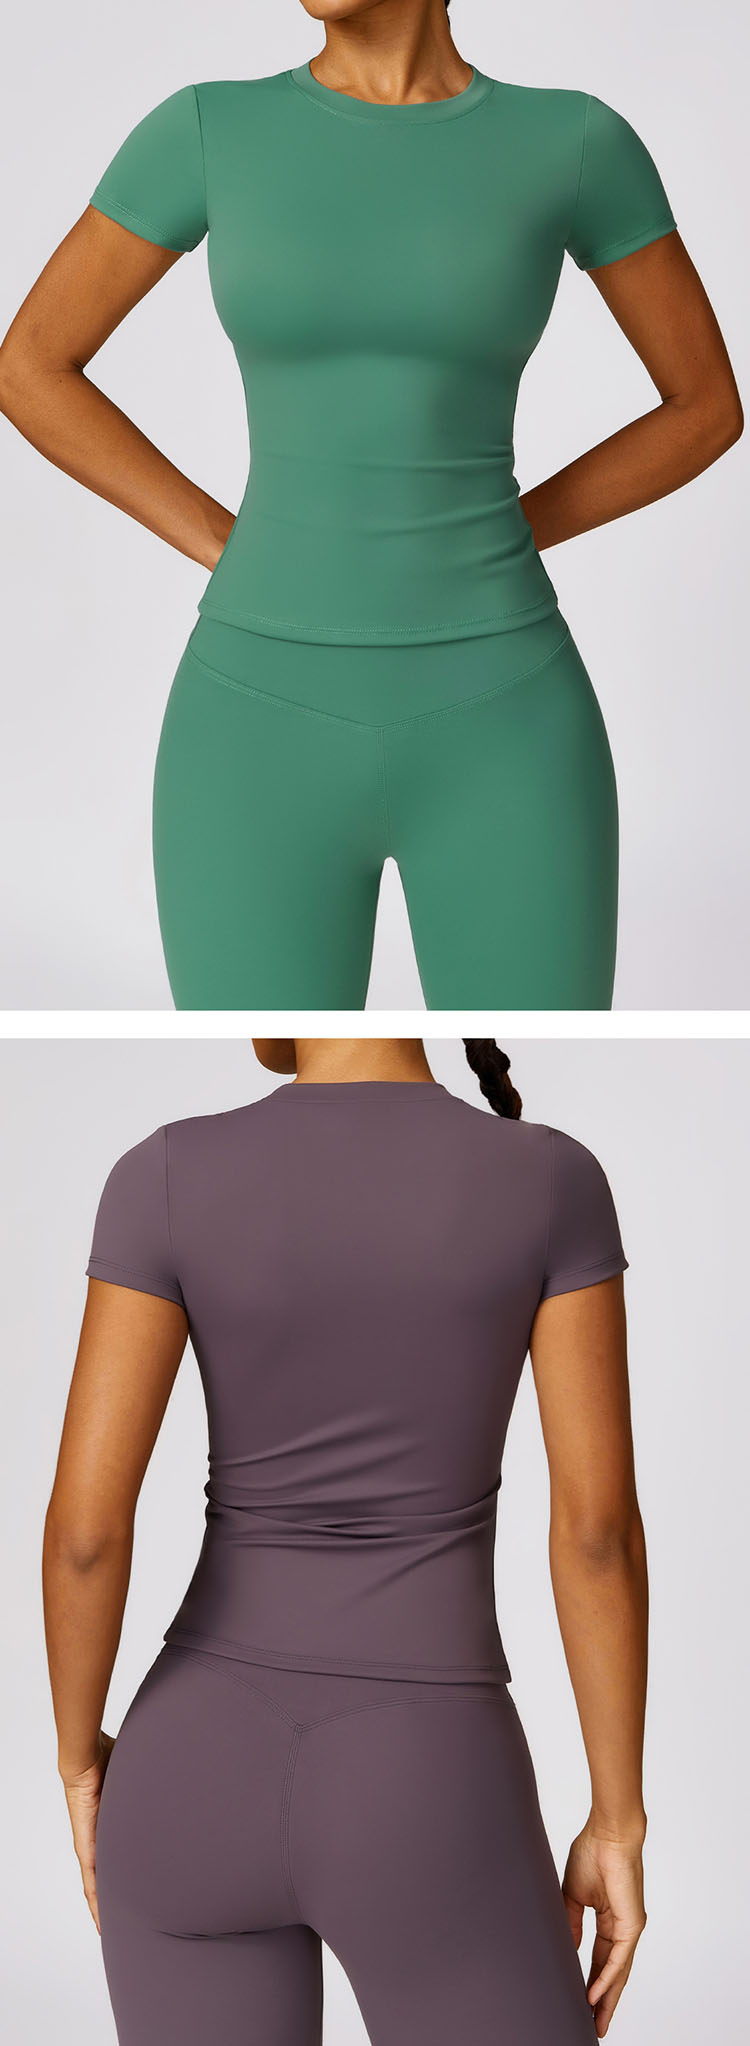 Slim-fit version design is adopted, and the waist is closed and shaped to fit the body curve